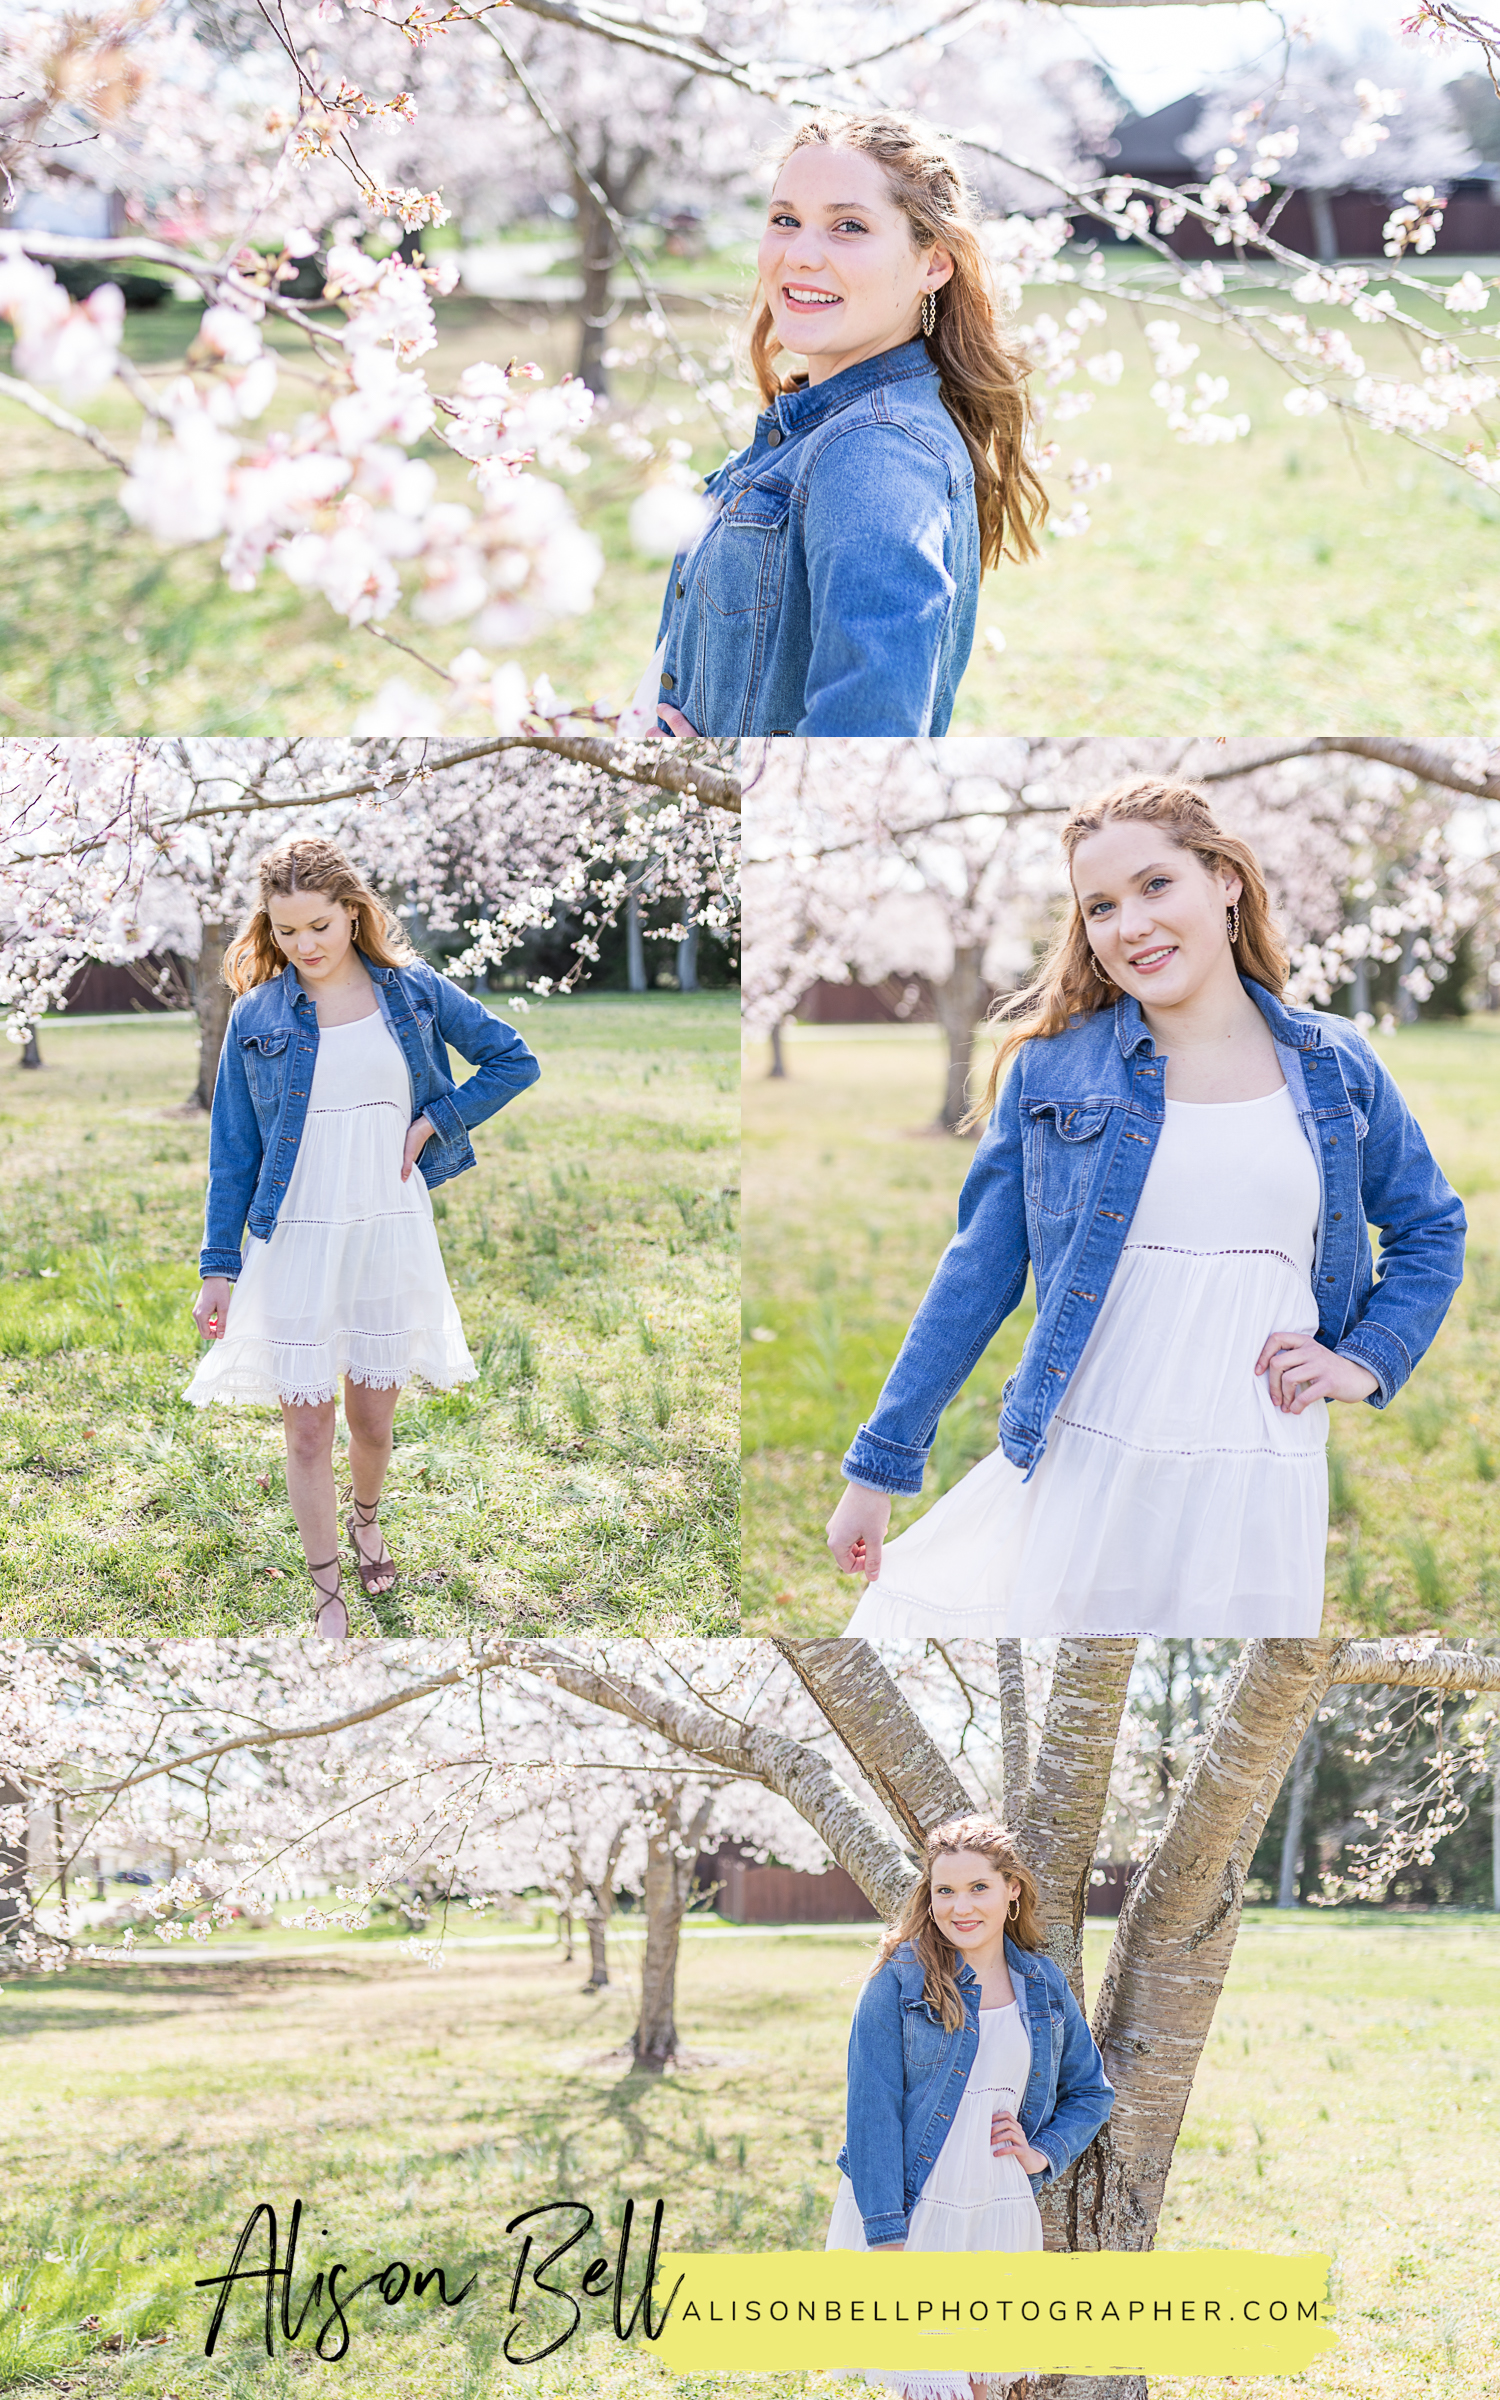 Spring senior photo session with cherry blossoms in virginia beach, va by alisonbell photographer